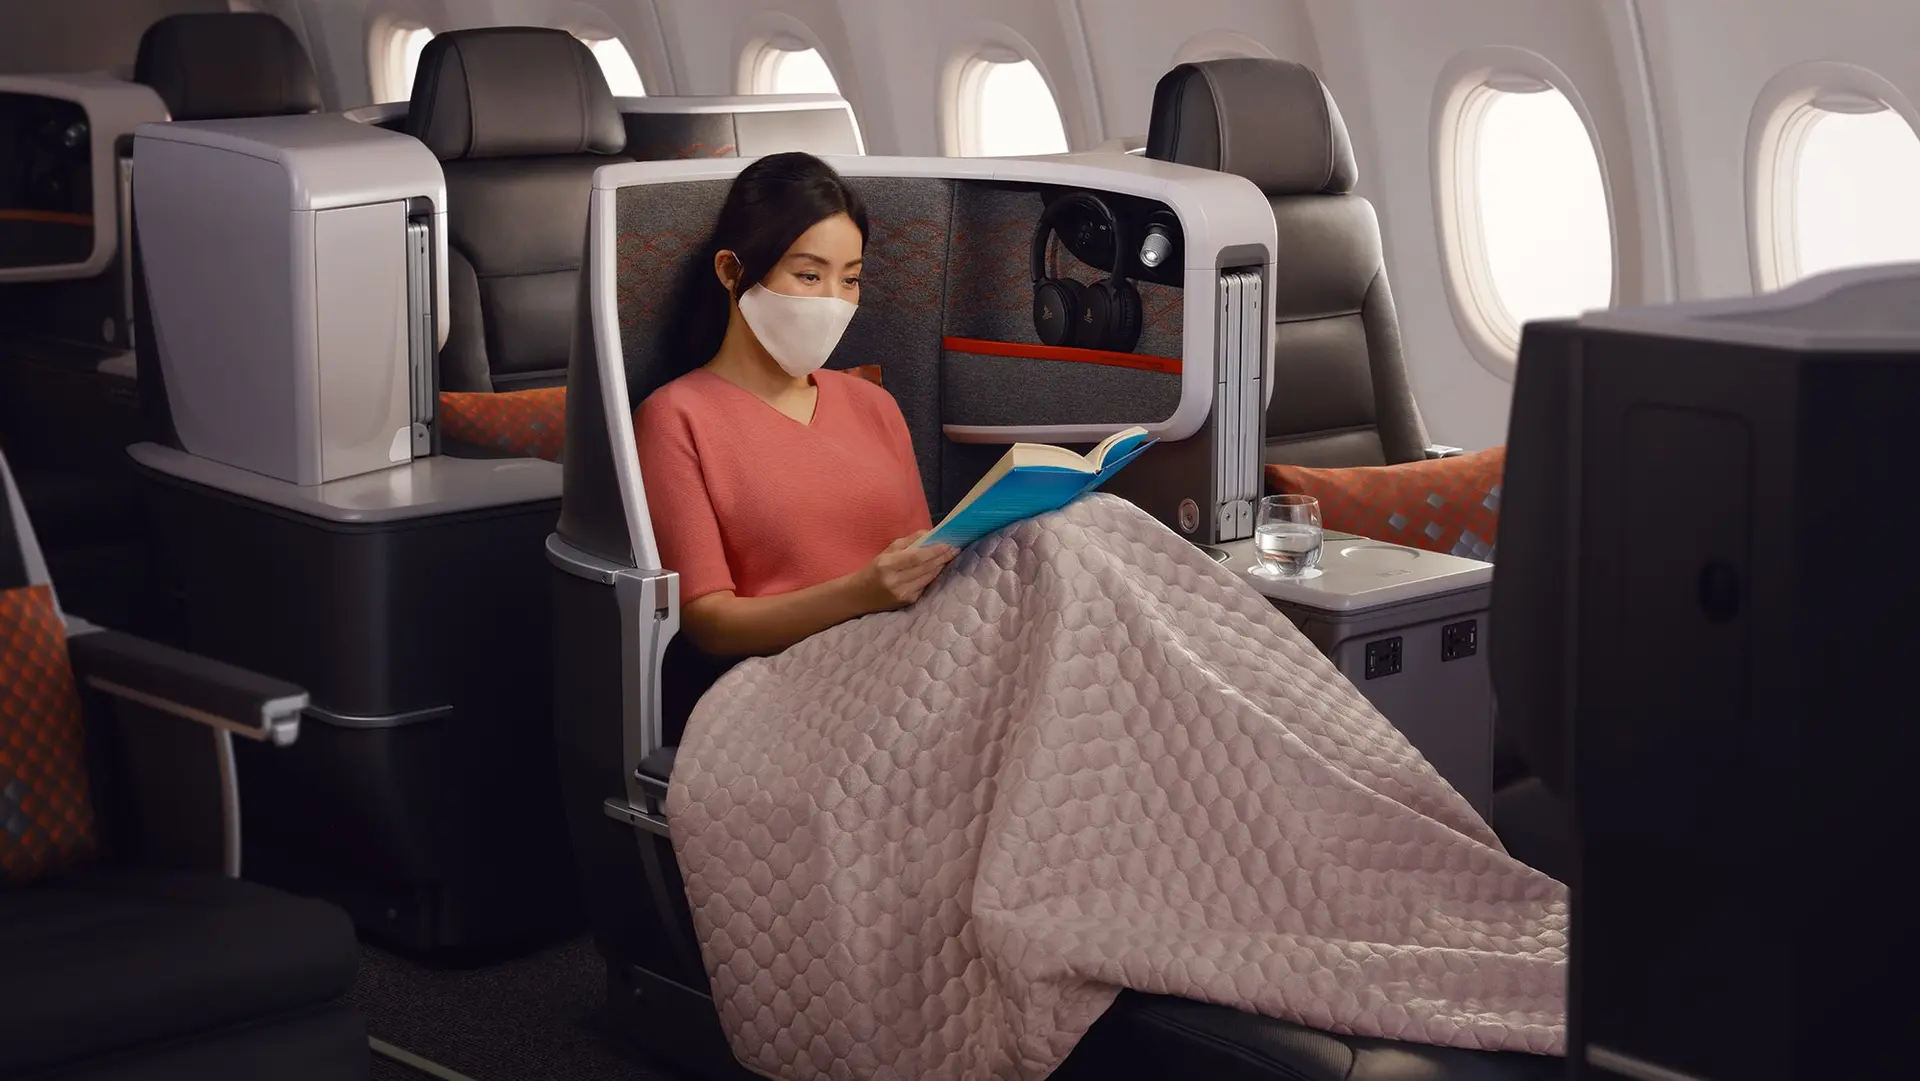 Airlines News - Singapore Airlines unveils a new Business Class flat-bed for its short-haul aircraft